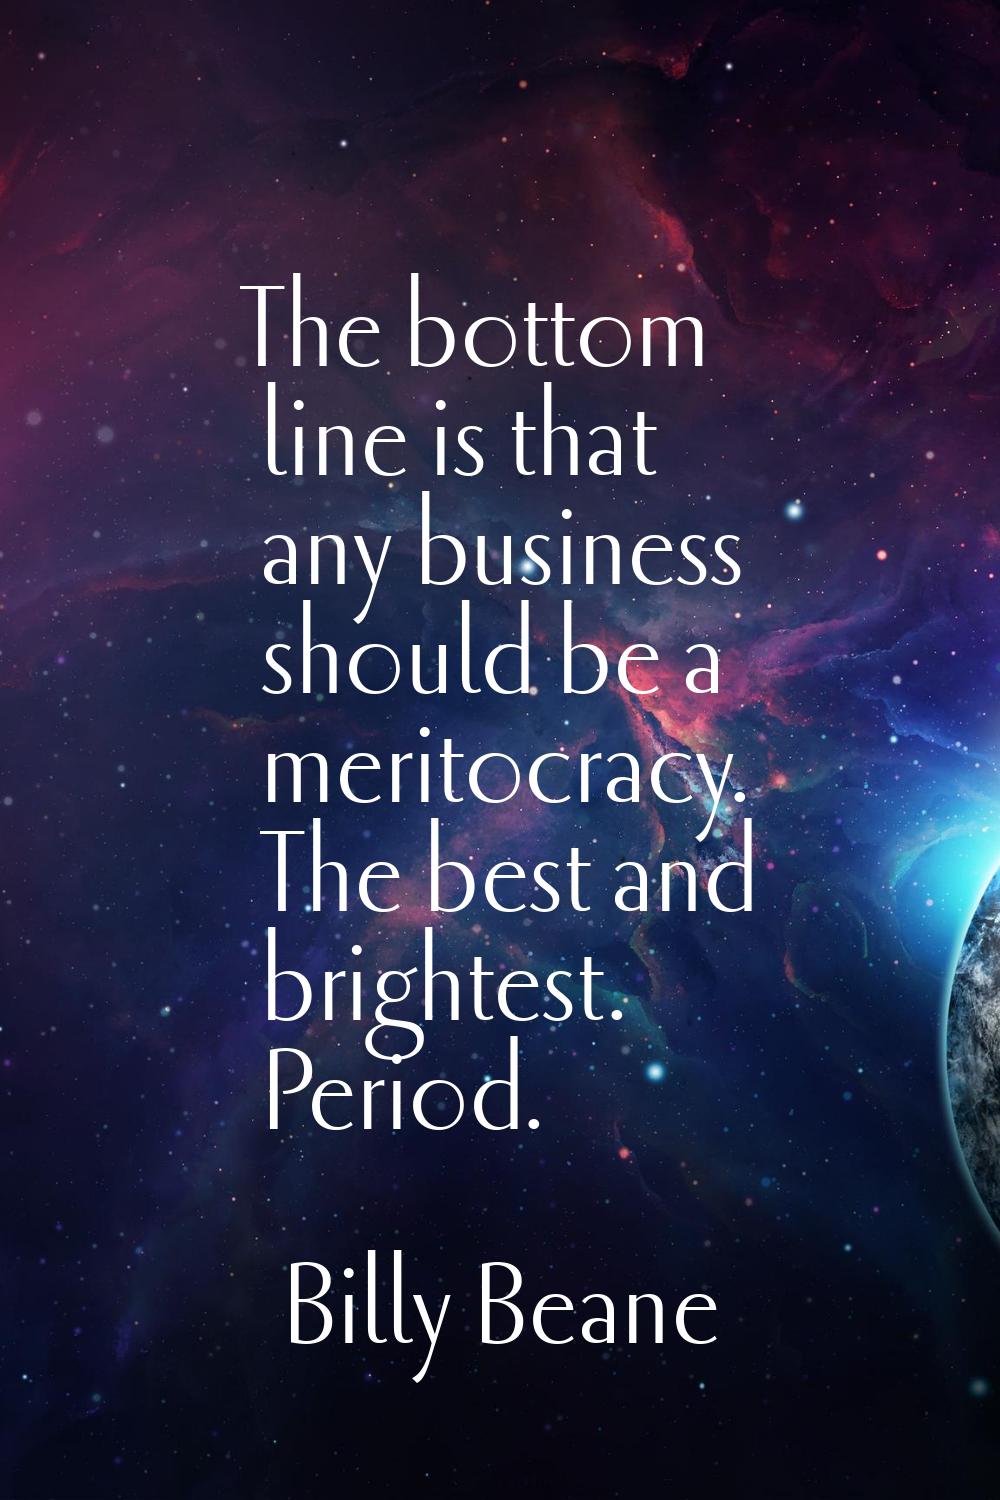 The bottom line is that any business should be a meritocracy. The best and brightest. Period.